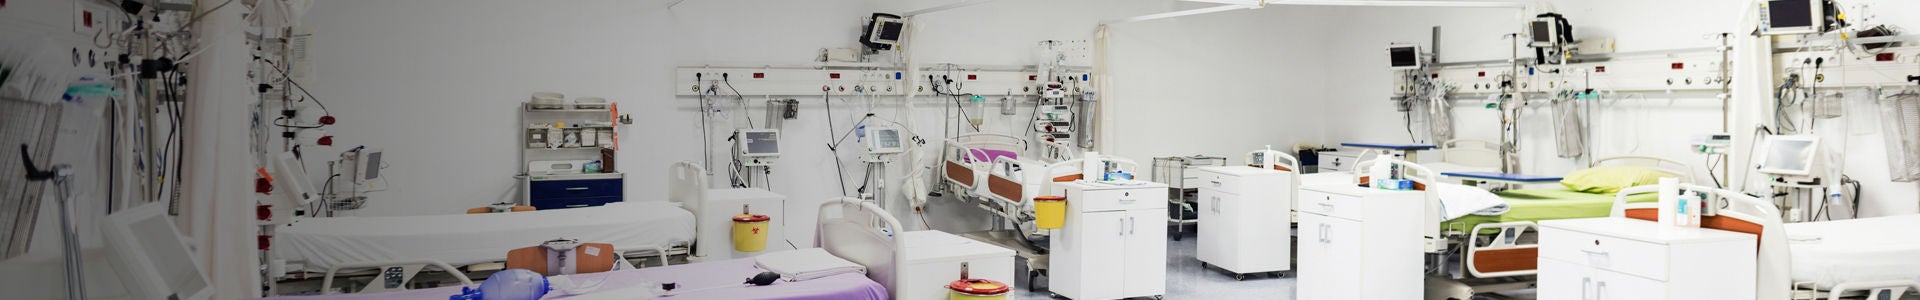 Intensive Care Unit Hospital Room and Equipment